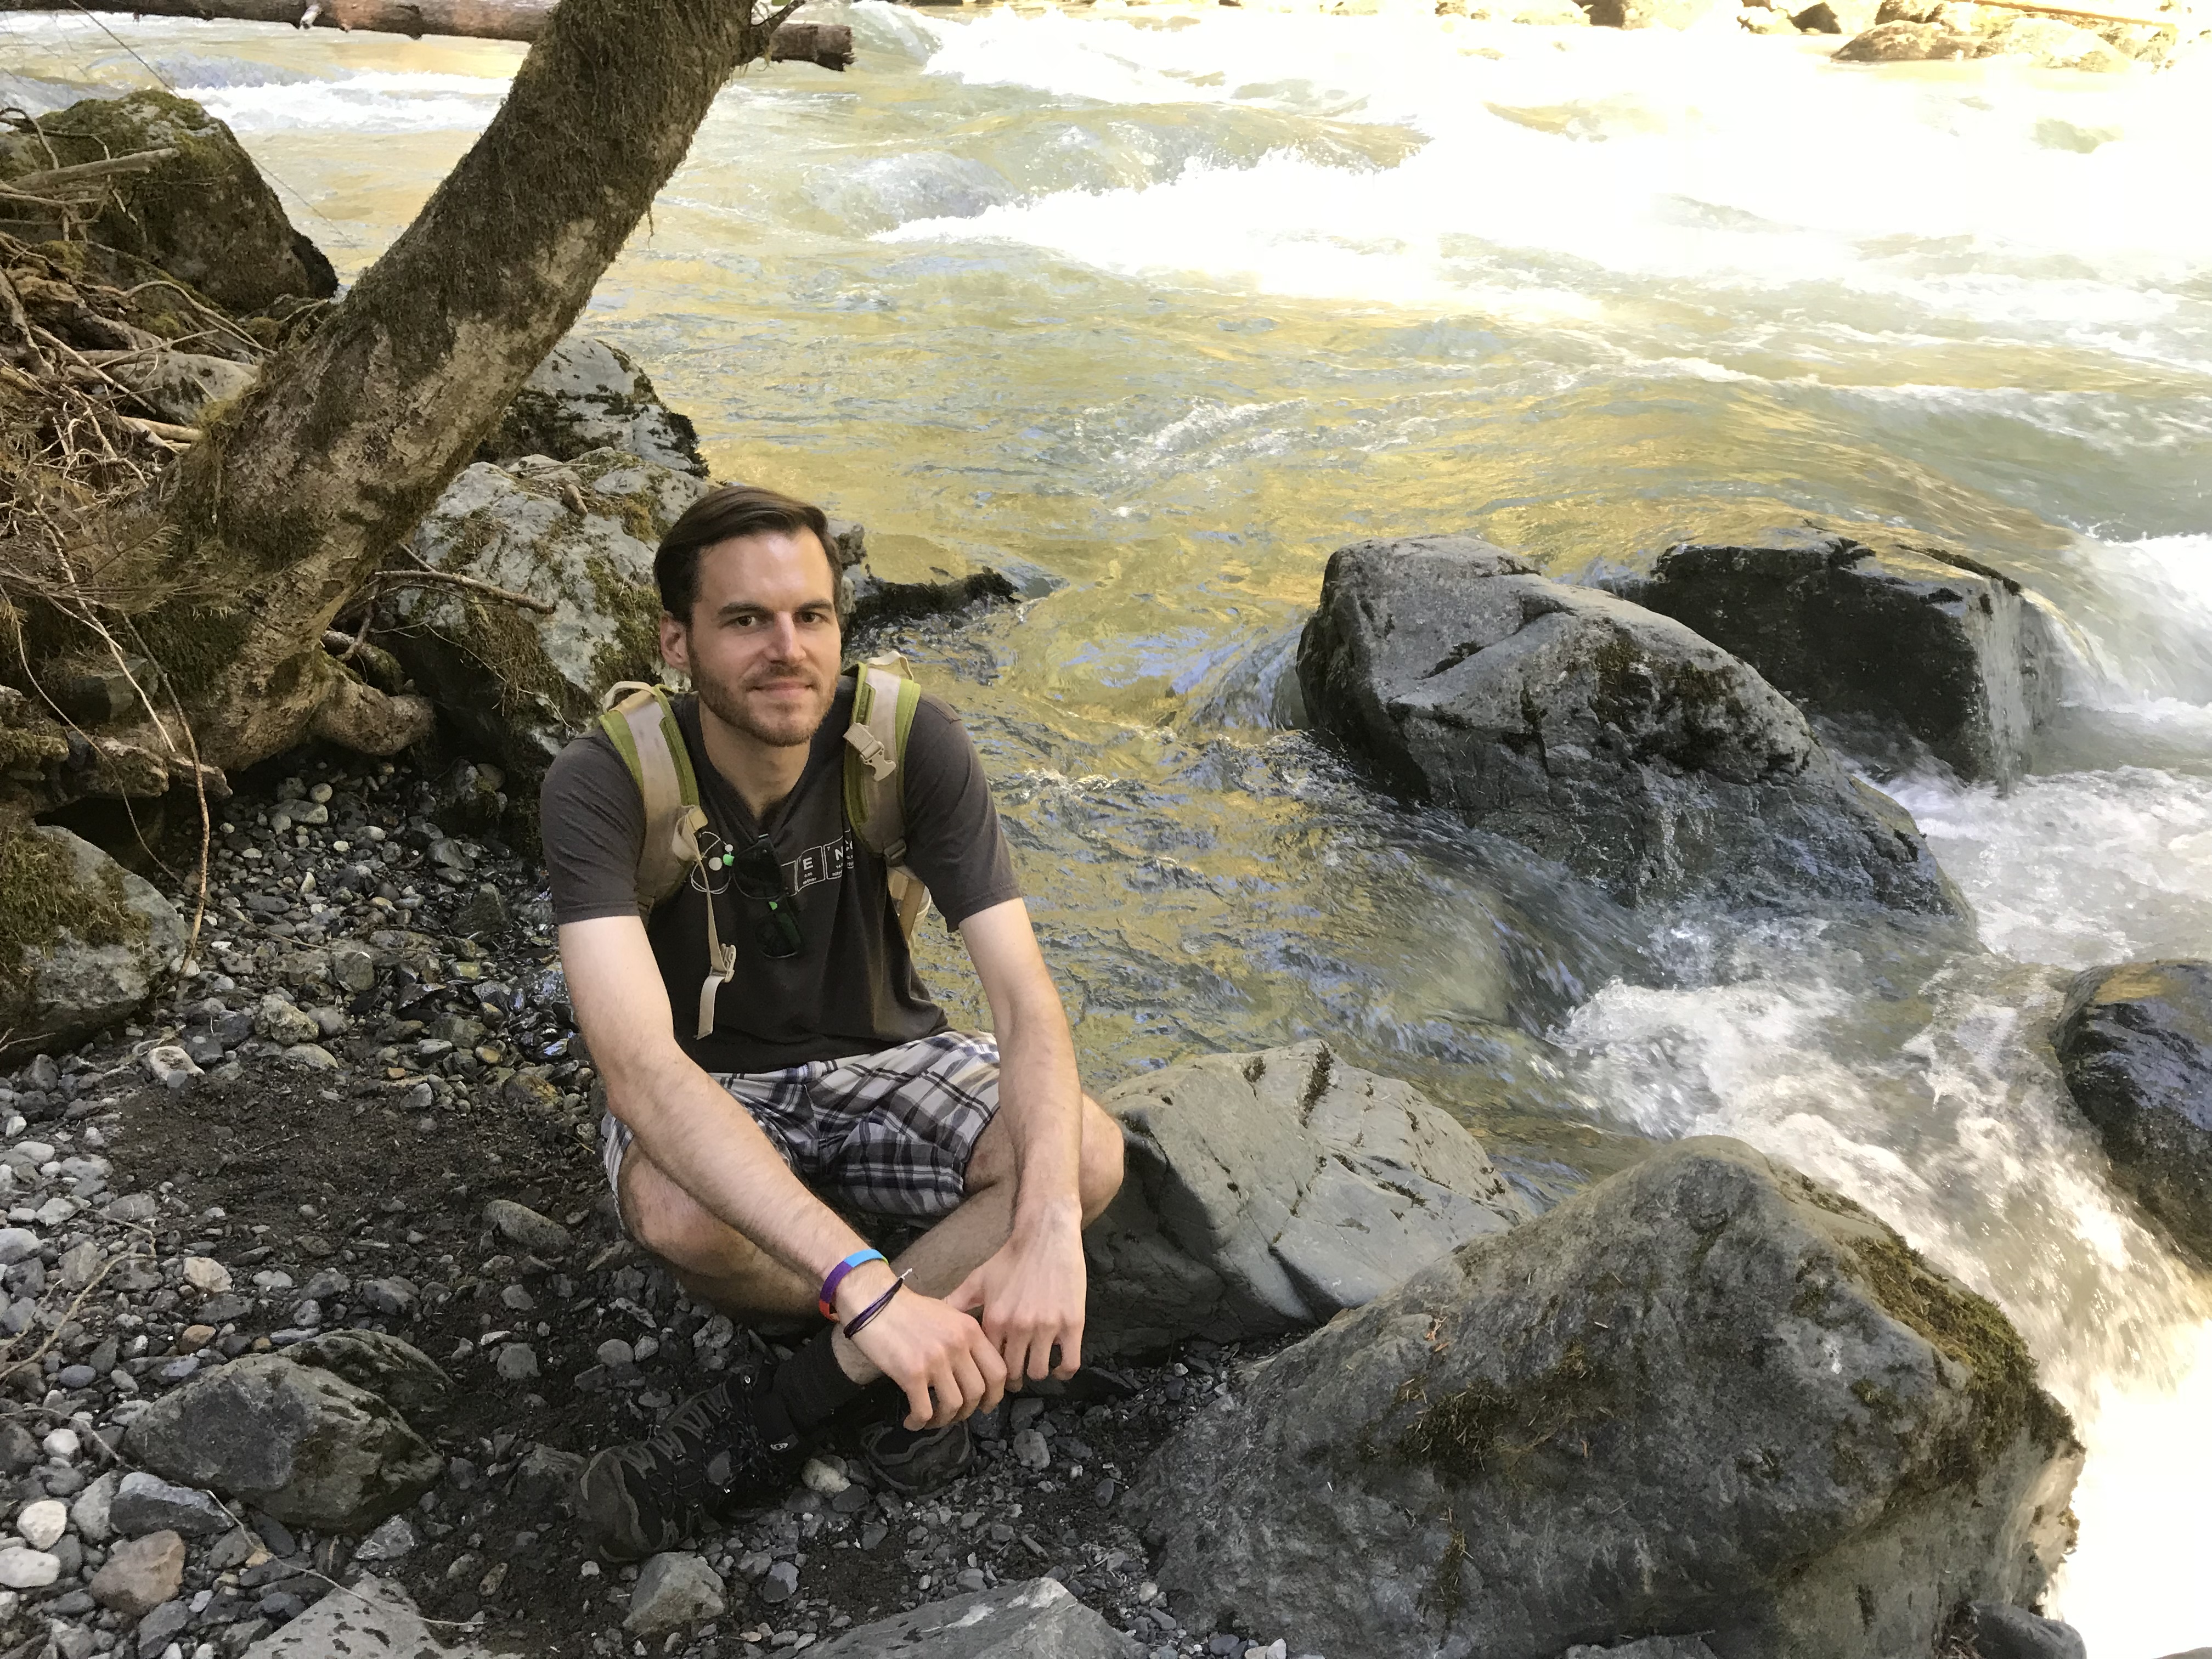 WWU graduate Eric Lawrence crouched by a river with boulders